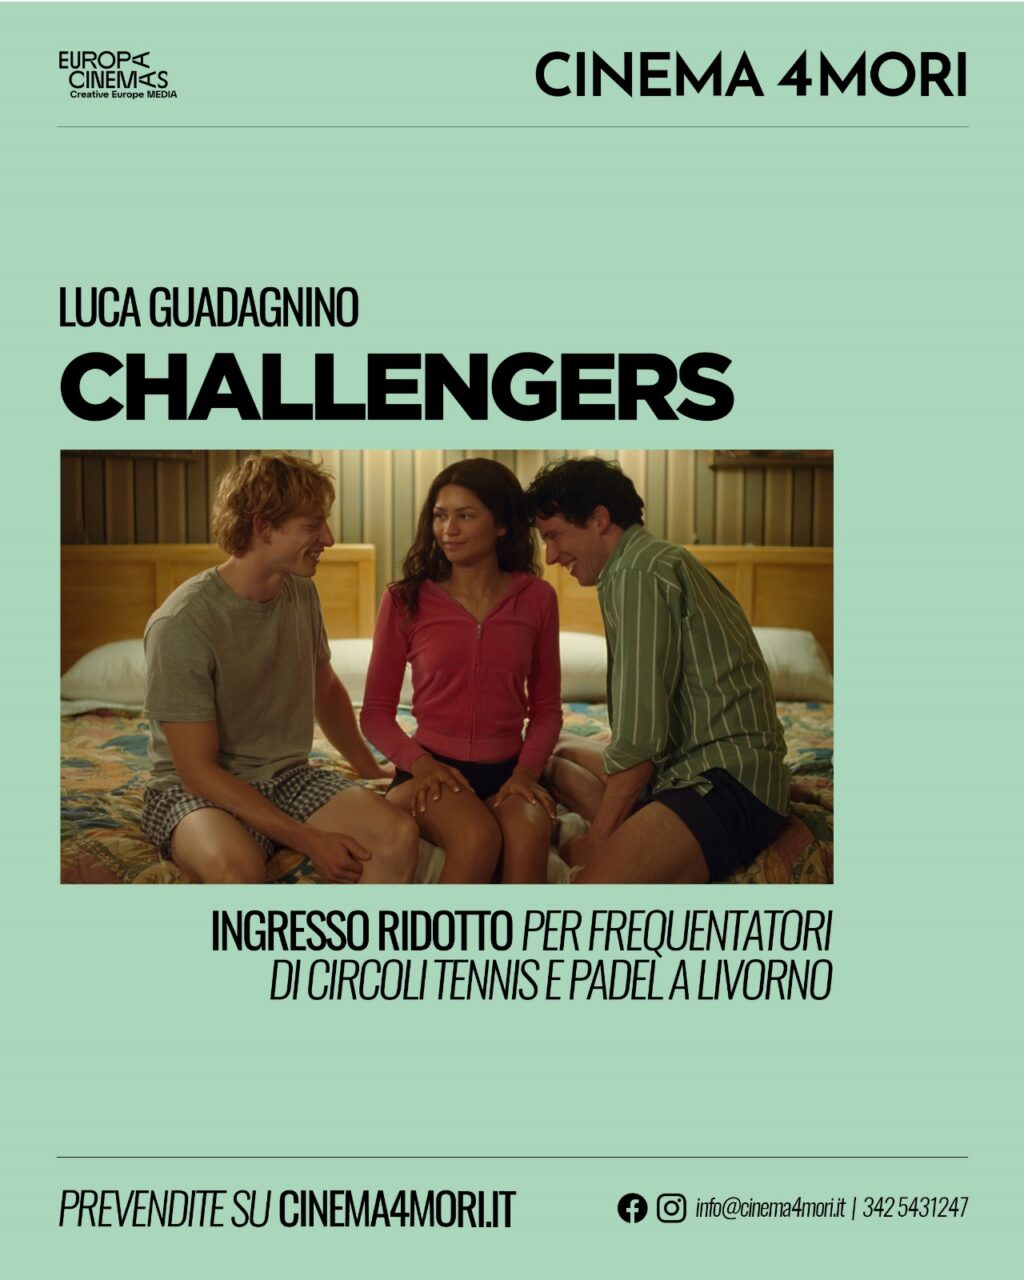 At the 4 Mori for the movie “Challengers” reduced ticket for members of tennis and padel clubs